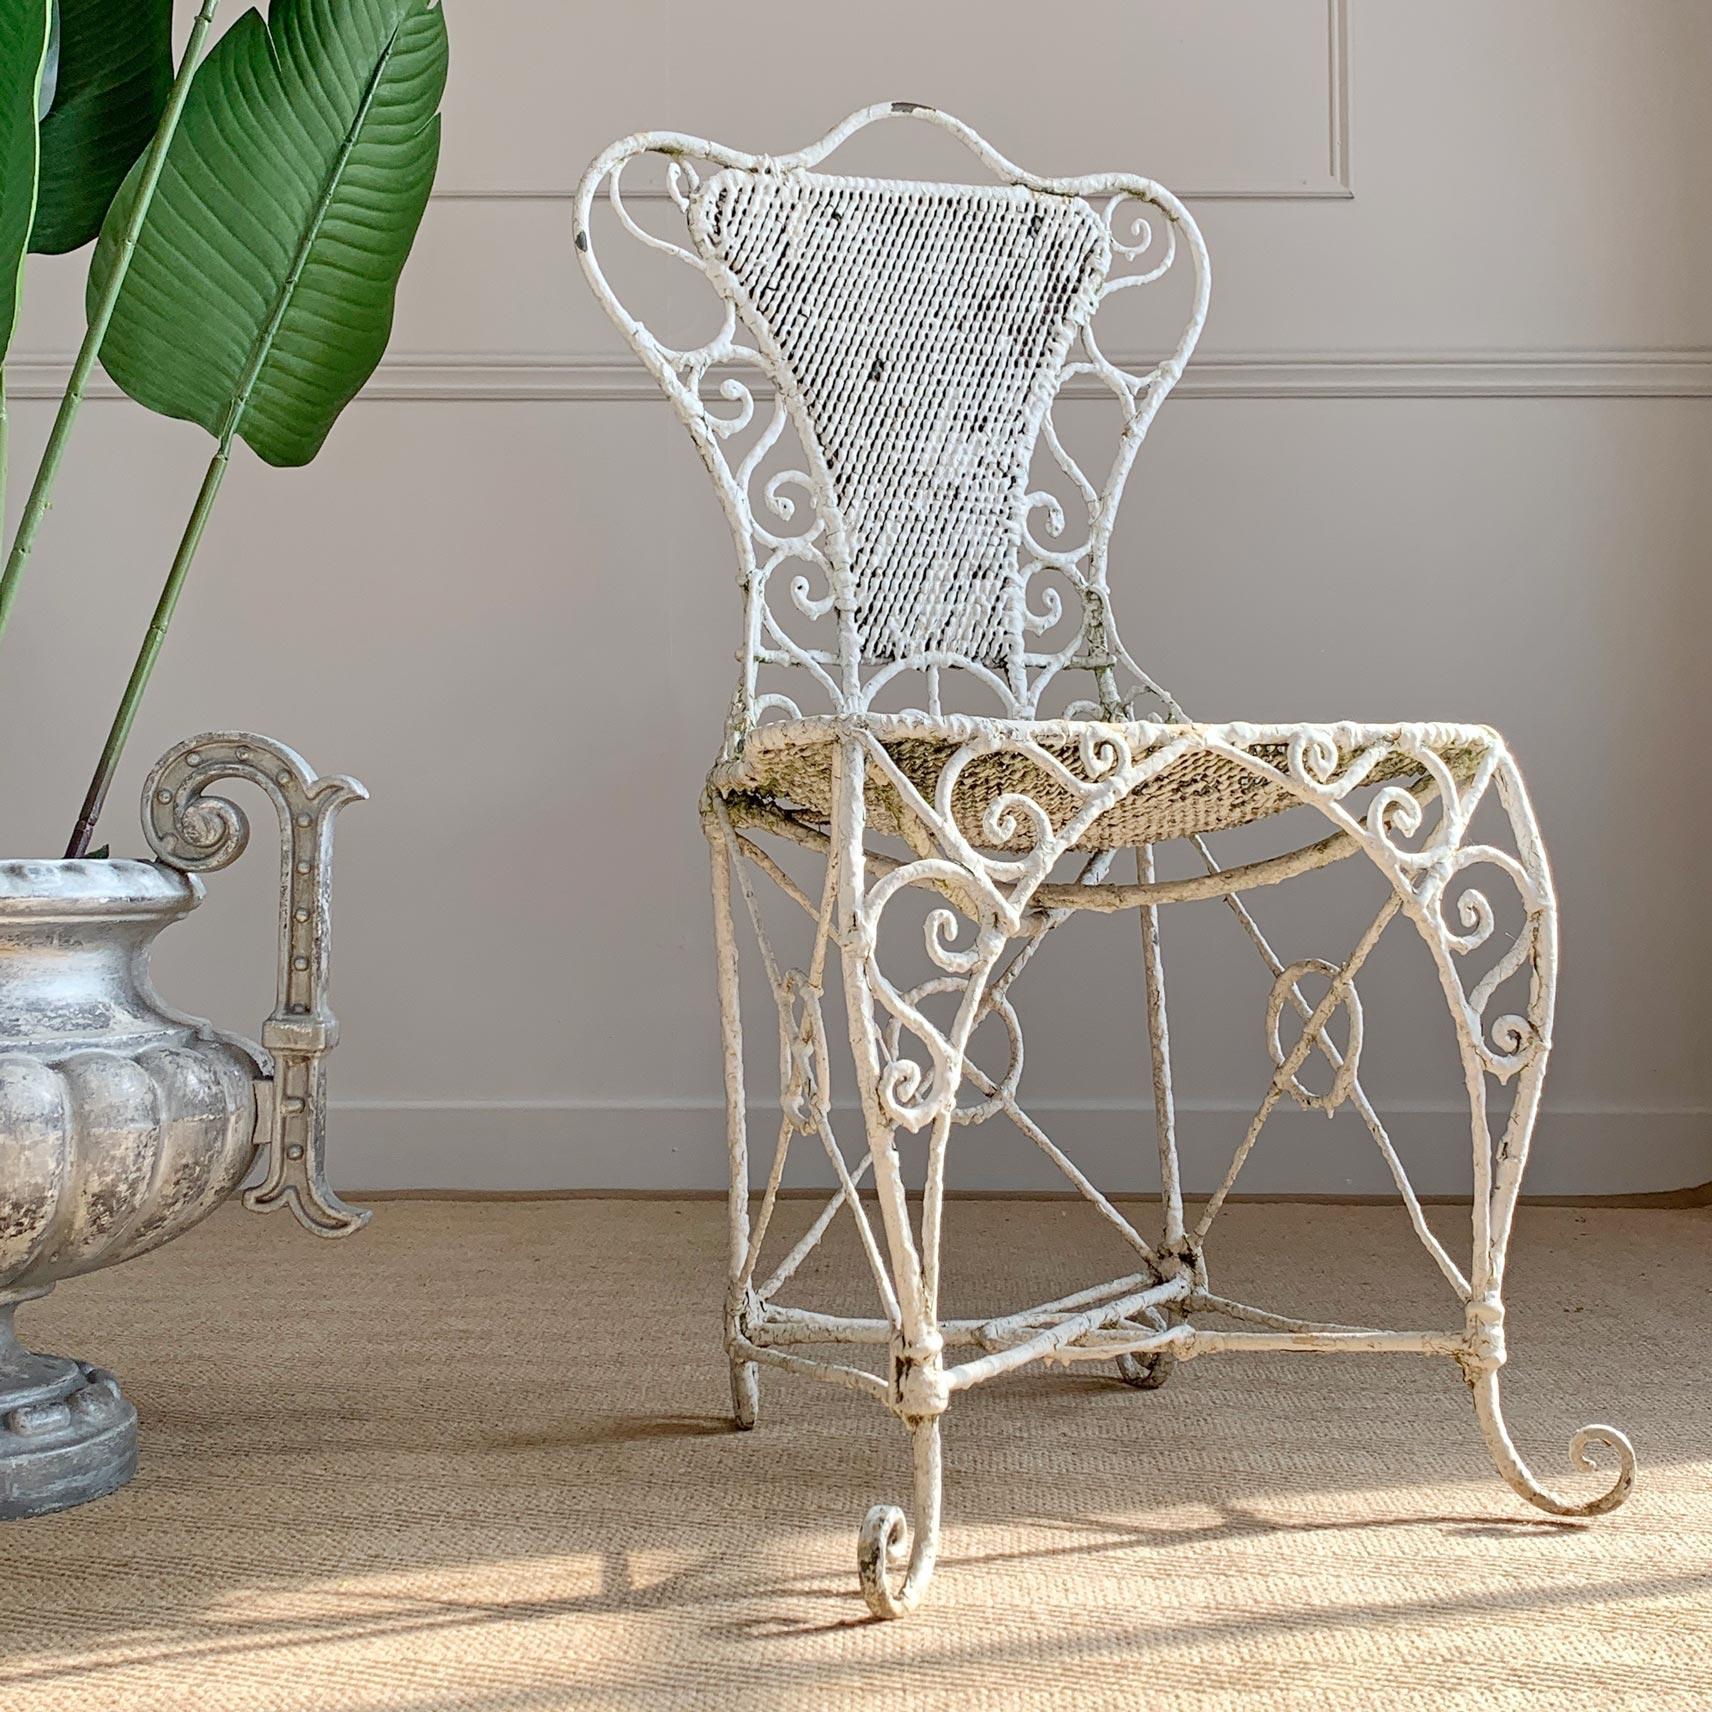 An untouched and incredibly ornate Regency period wirework and wrought iron chair, superb form and scale.

English, dating to the very early 19th century.

Height 82.5cm x Width 44cm x Depth 42cm

Seat Height 41cm x Depth 32cm x Width 42cm.